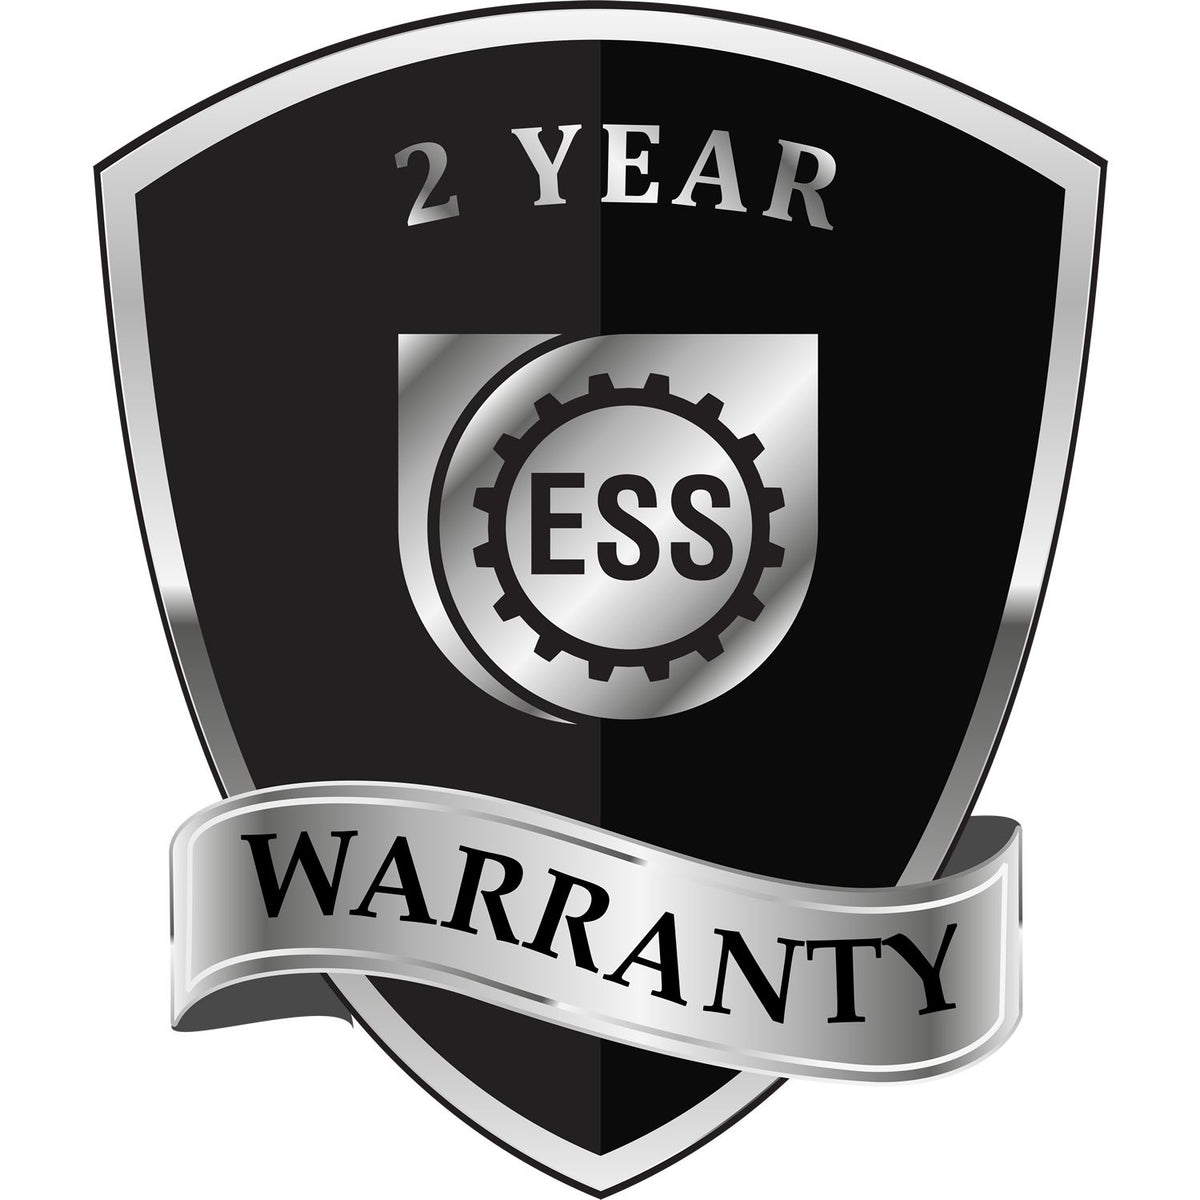 A black and silver badge or emblem showing warranty information for the Handheld Wisconsin Professional Geologist Embosser